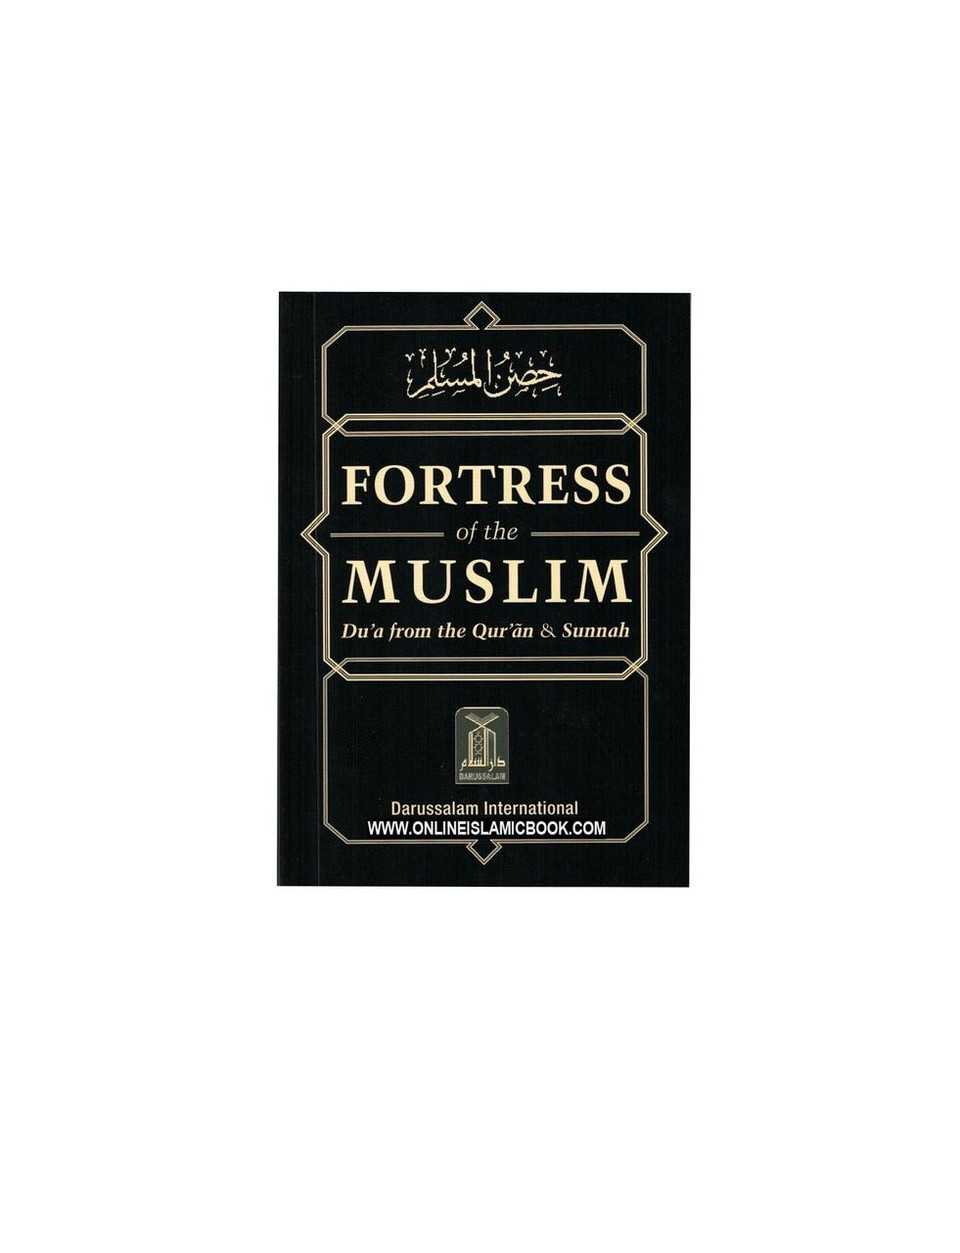 The Fortress of the Muslim